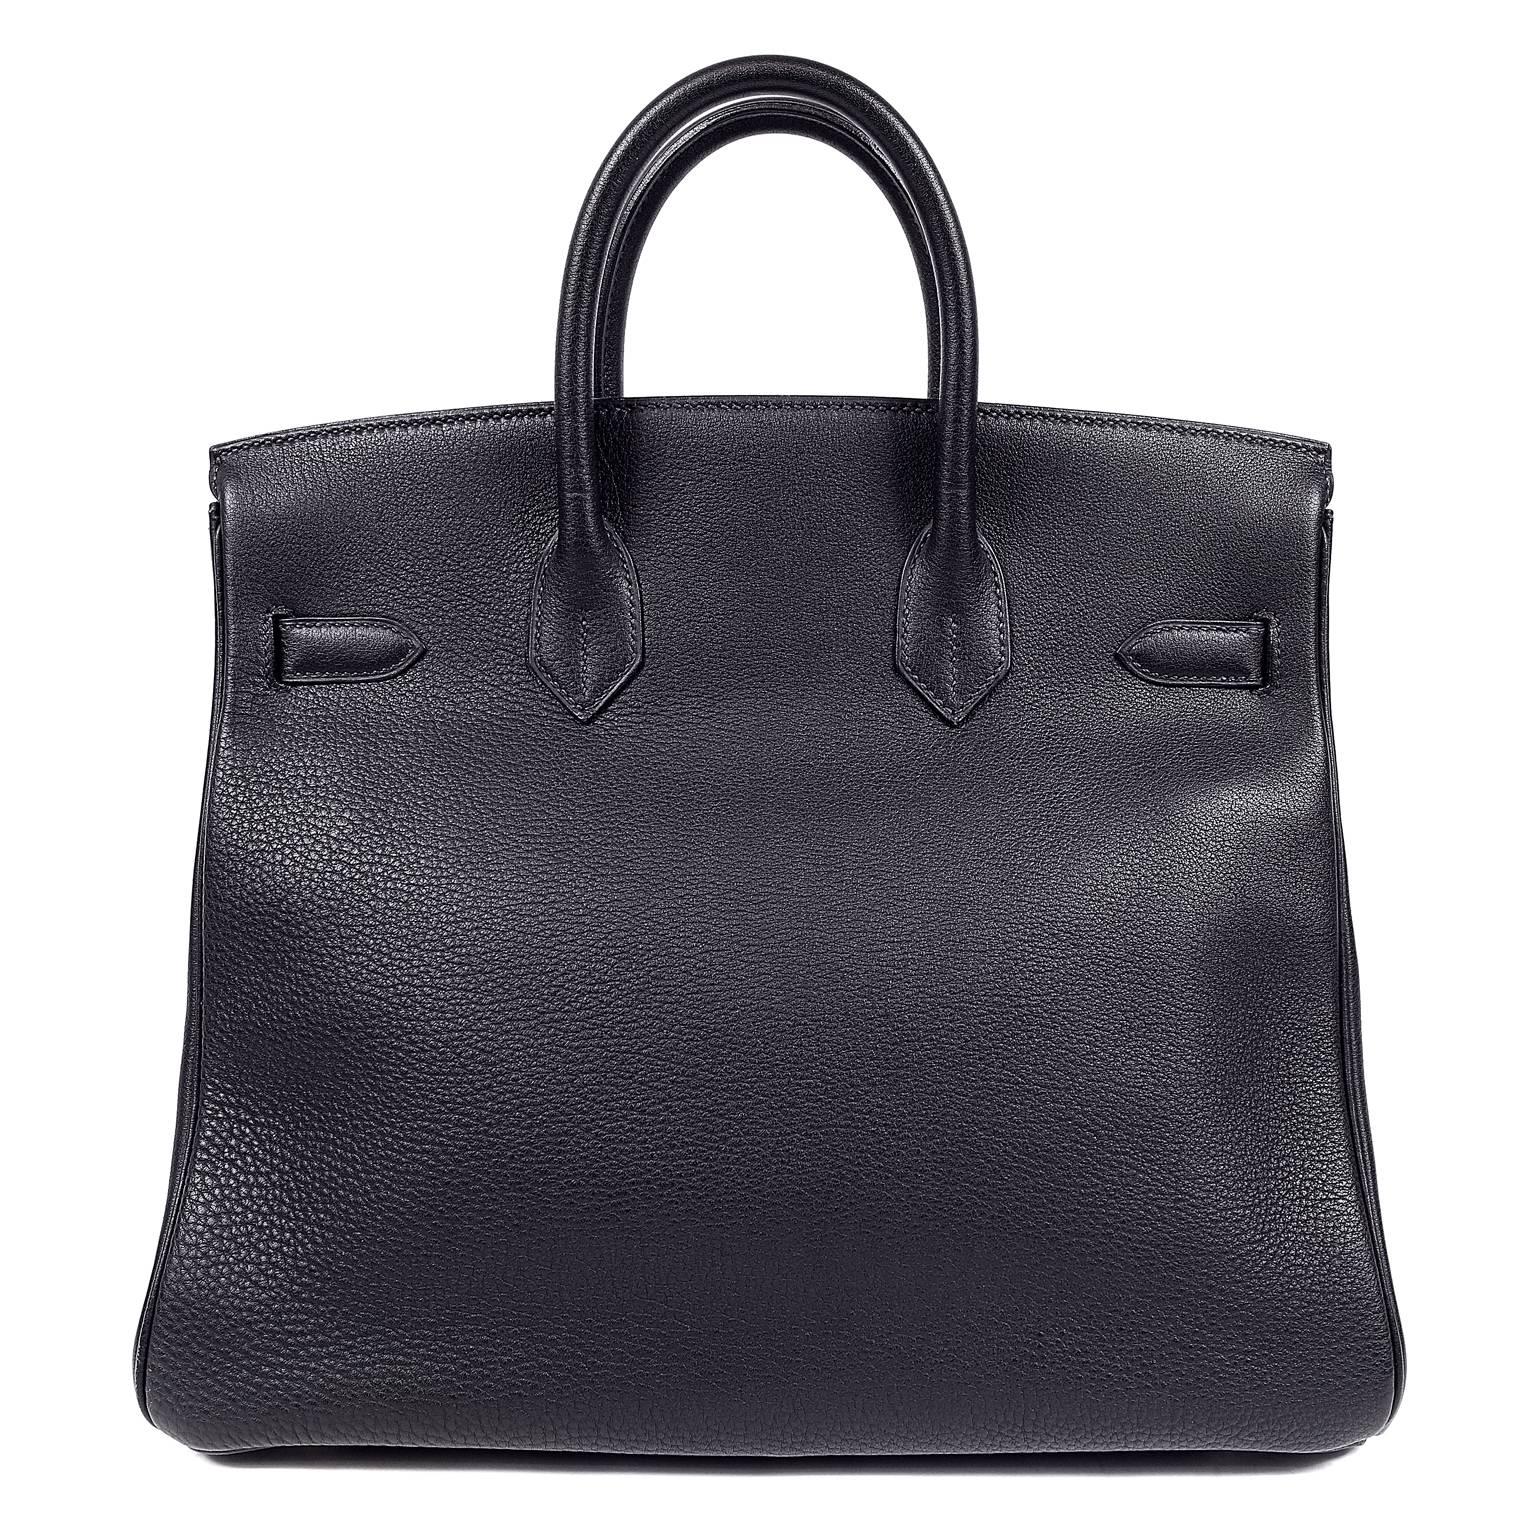 Hermès Indigo Togo 32 cm HAC- MINT condition!!!
 Considered the ultimate luxury item the world over and hand stitched by skilled craftsmen, wait lists of a year or more are commonplace for Hermès bags. The HAC (Haut a Courroies or “high belts” bag)